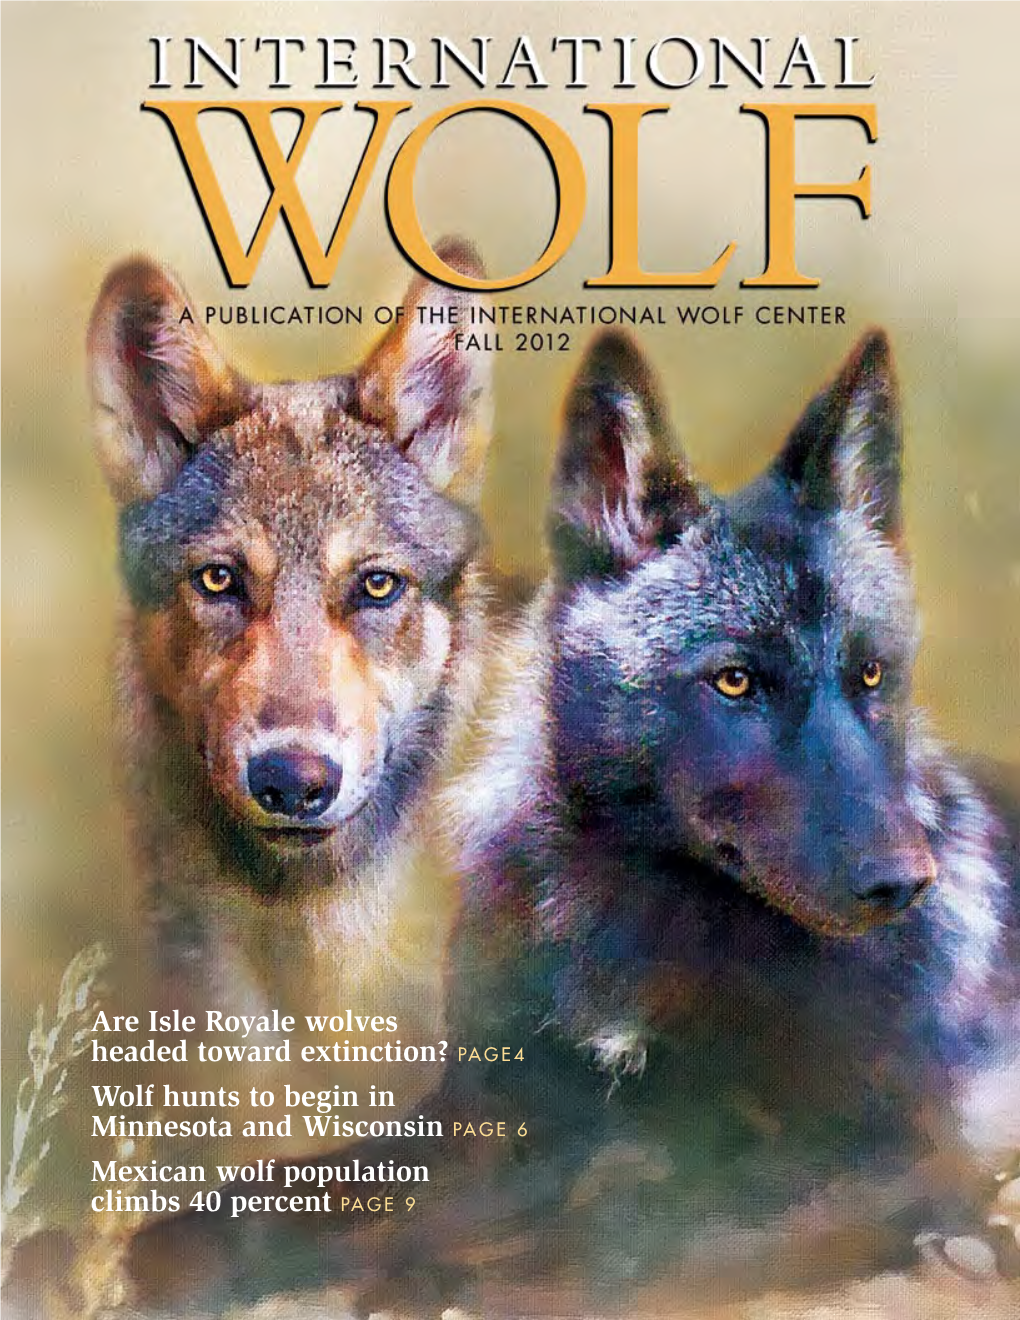 Are Isle Royale Wolves Headed Toward Extinction? PAGE4 Wolf Hunts to Begin in Minnesota and Wisconsin PAGE 6 Mexican Wolf Population Climbs 40 Percent PAGE 9